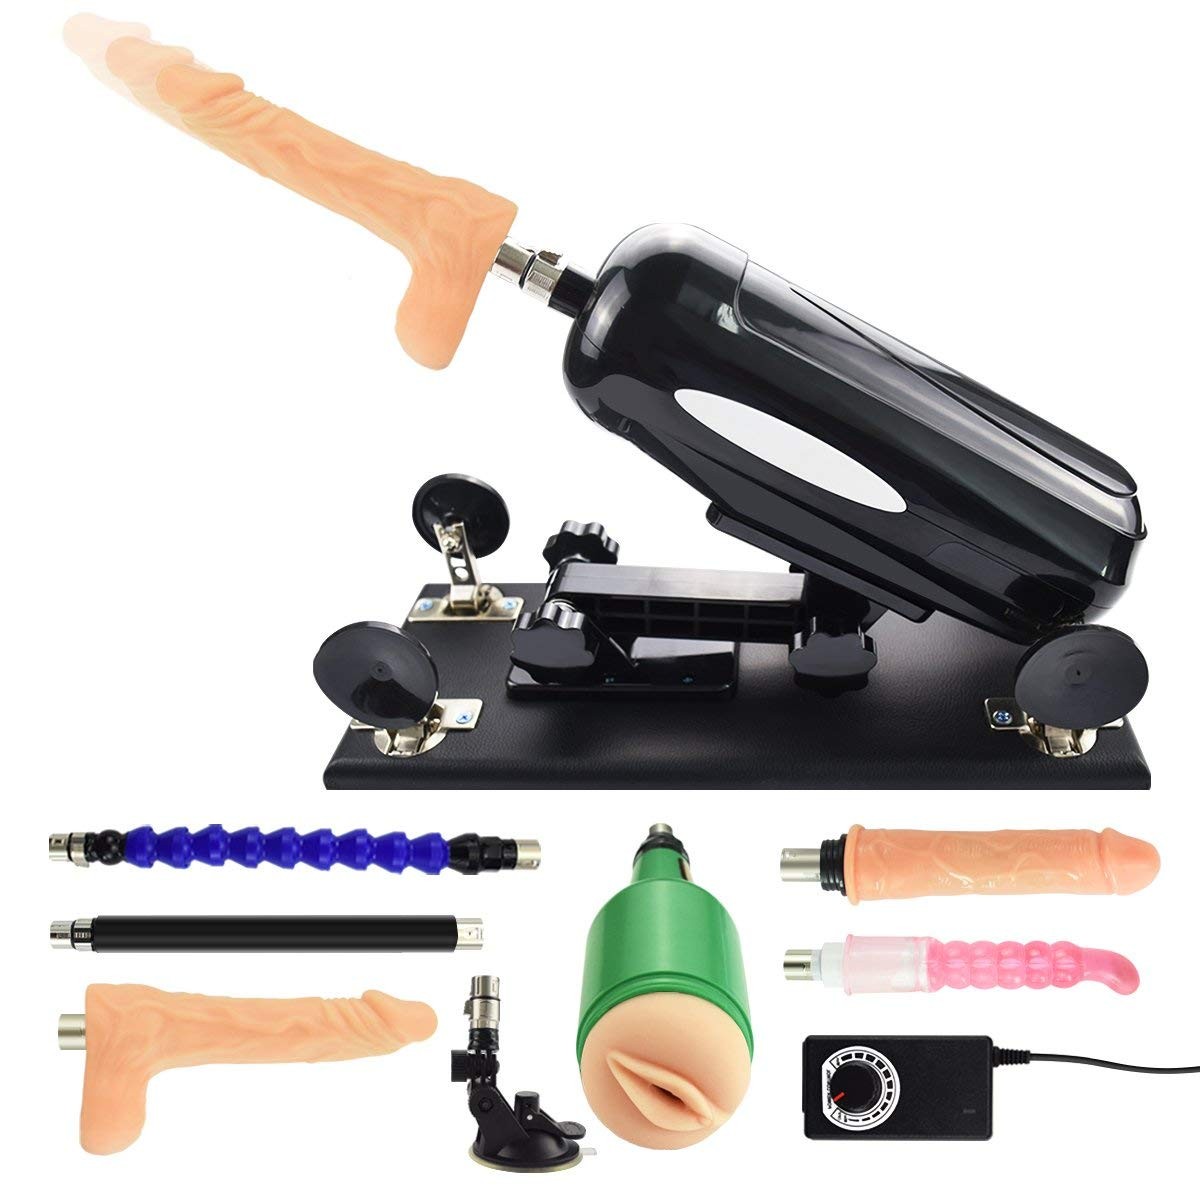 New Discount Sex Machine for Couples Sex Masturbation With Attachments